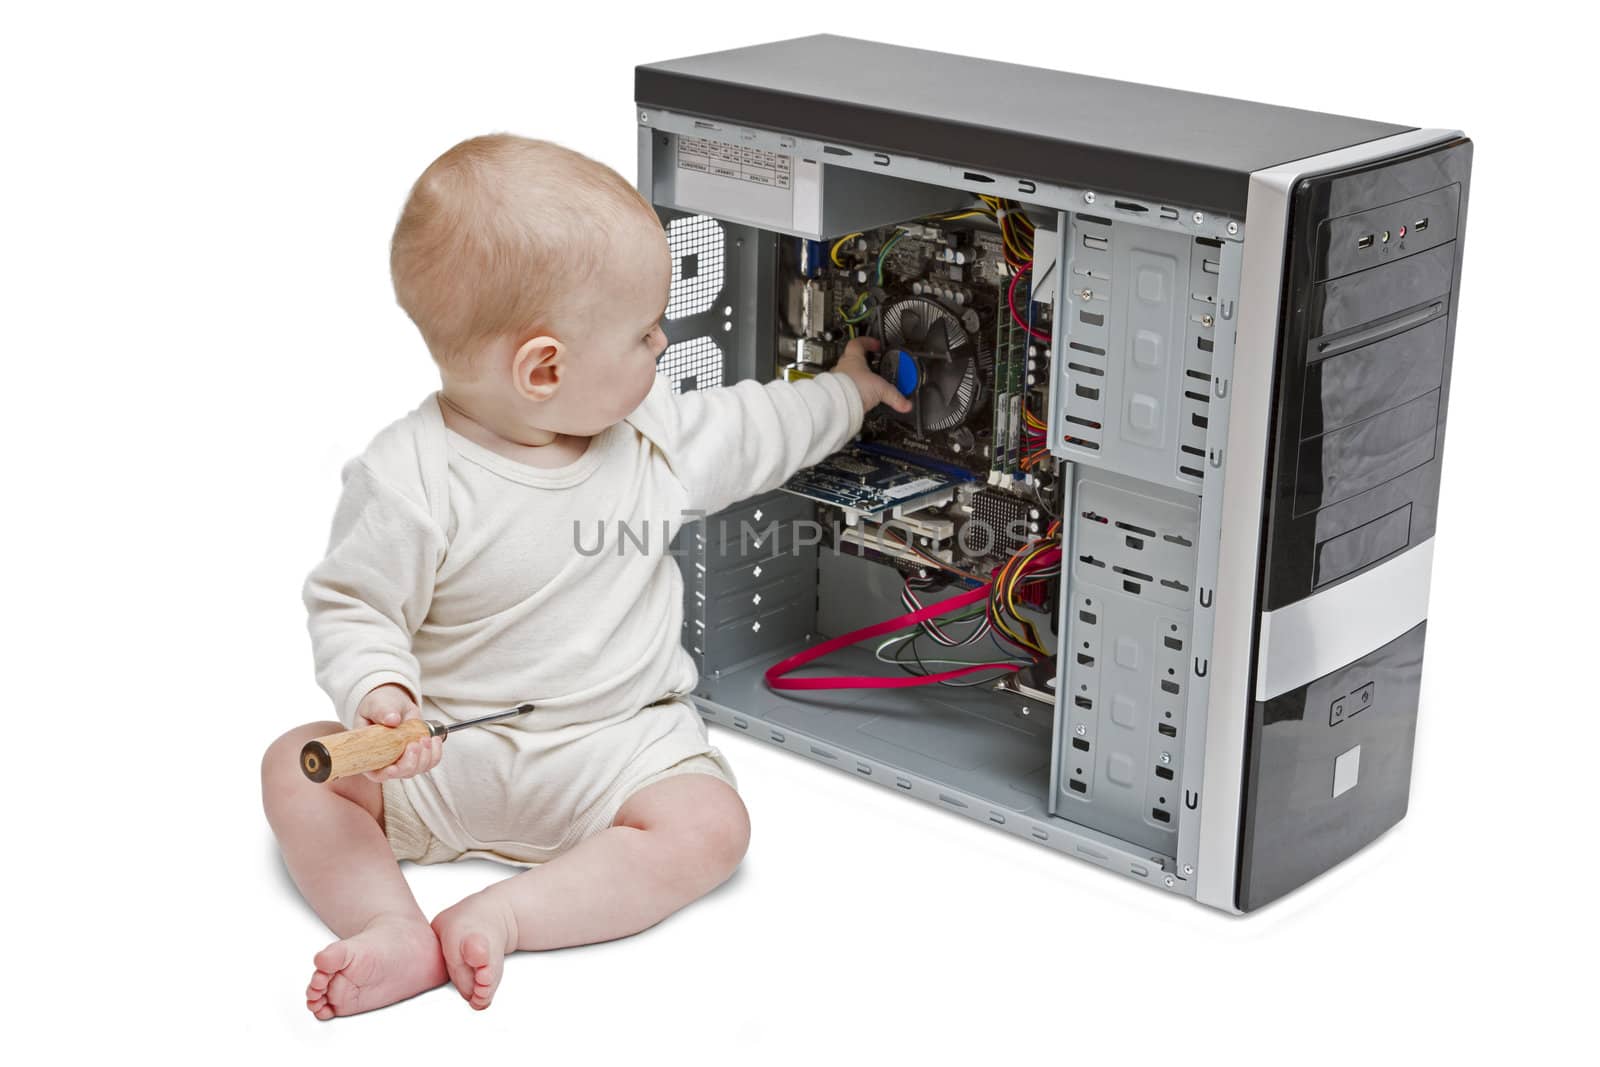 young child with screwdriver in hand working on open computer in white background.